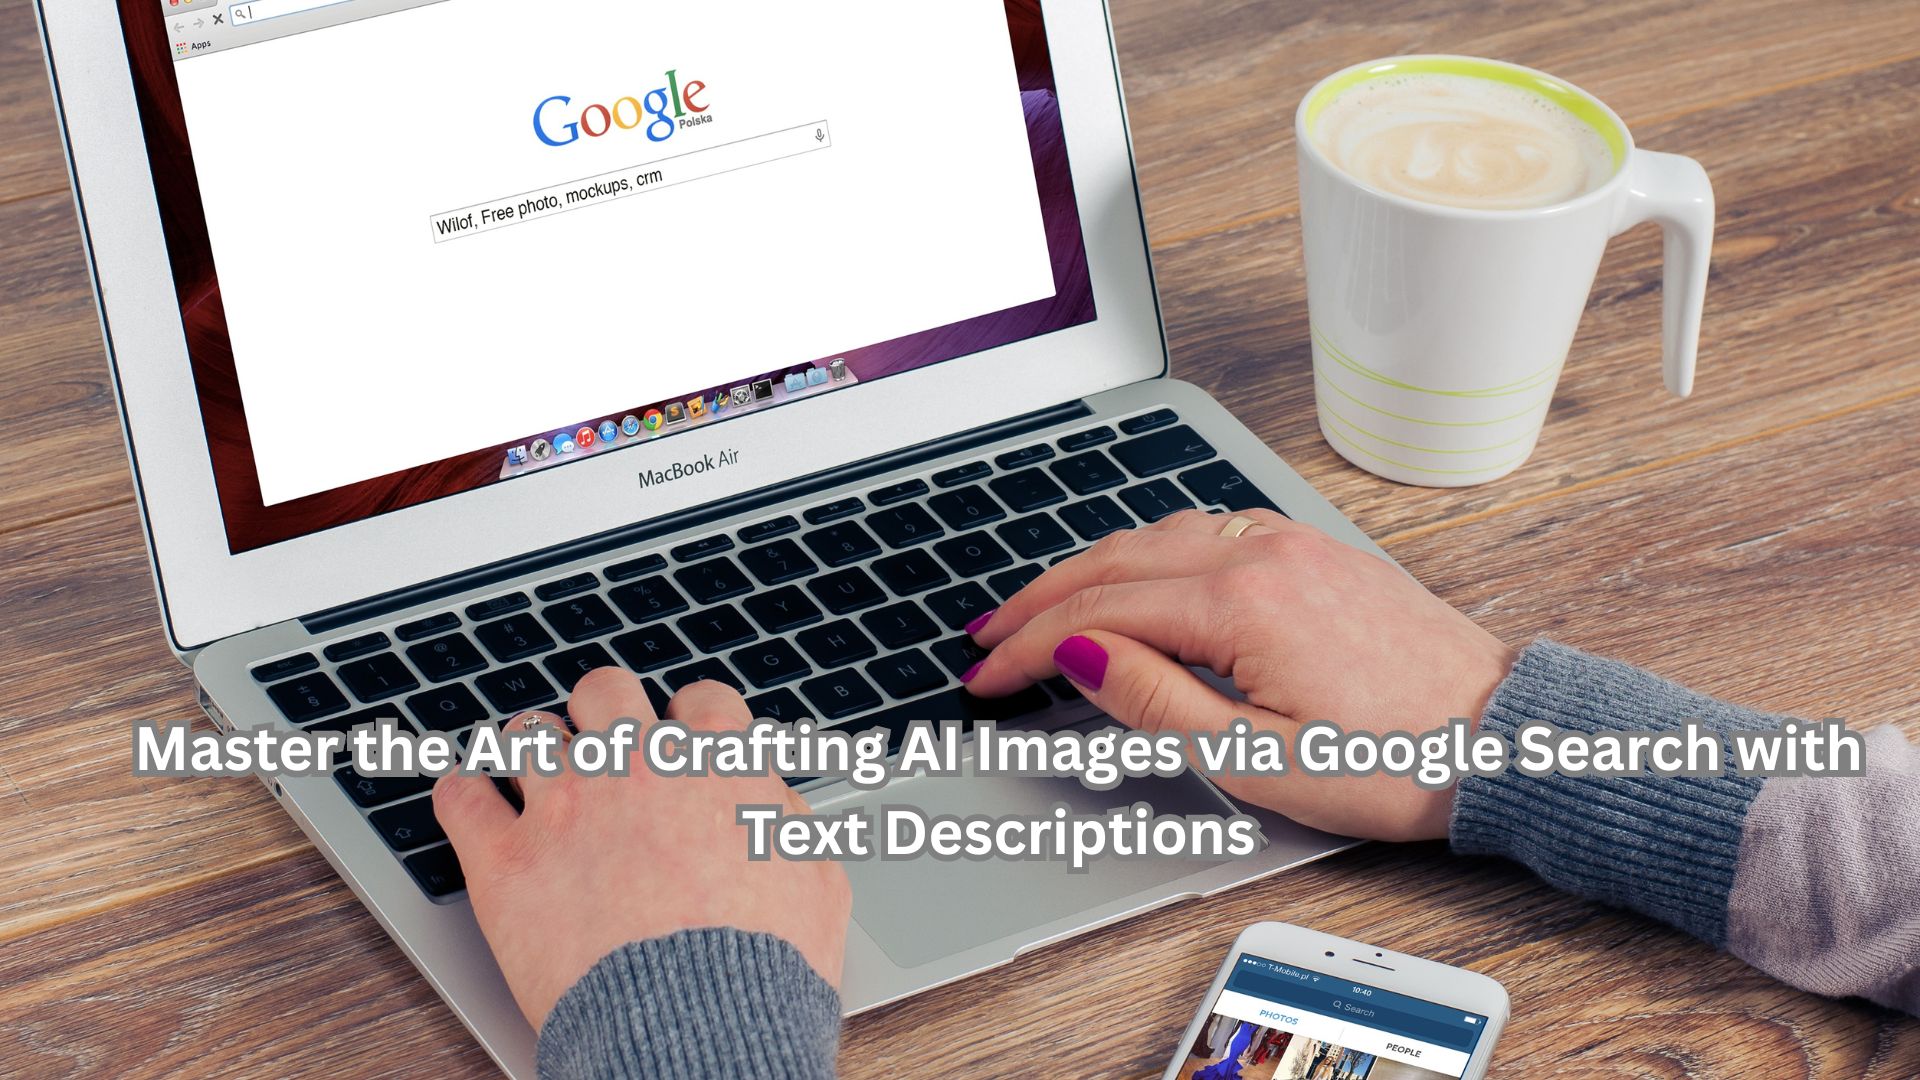 Master the Art of Crafting AI Images via Google Search with Text Descriptions